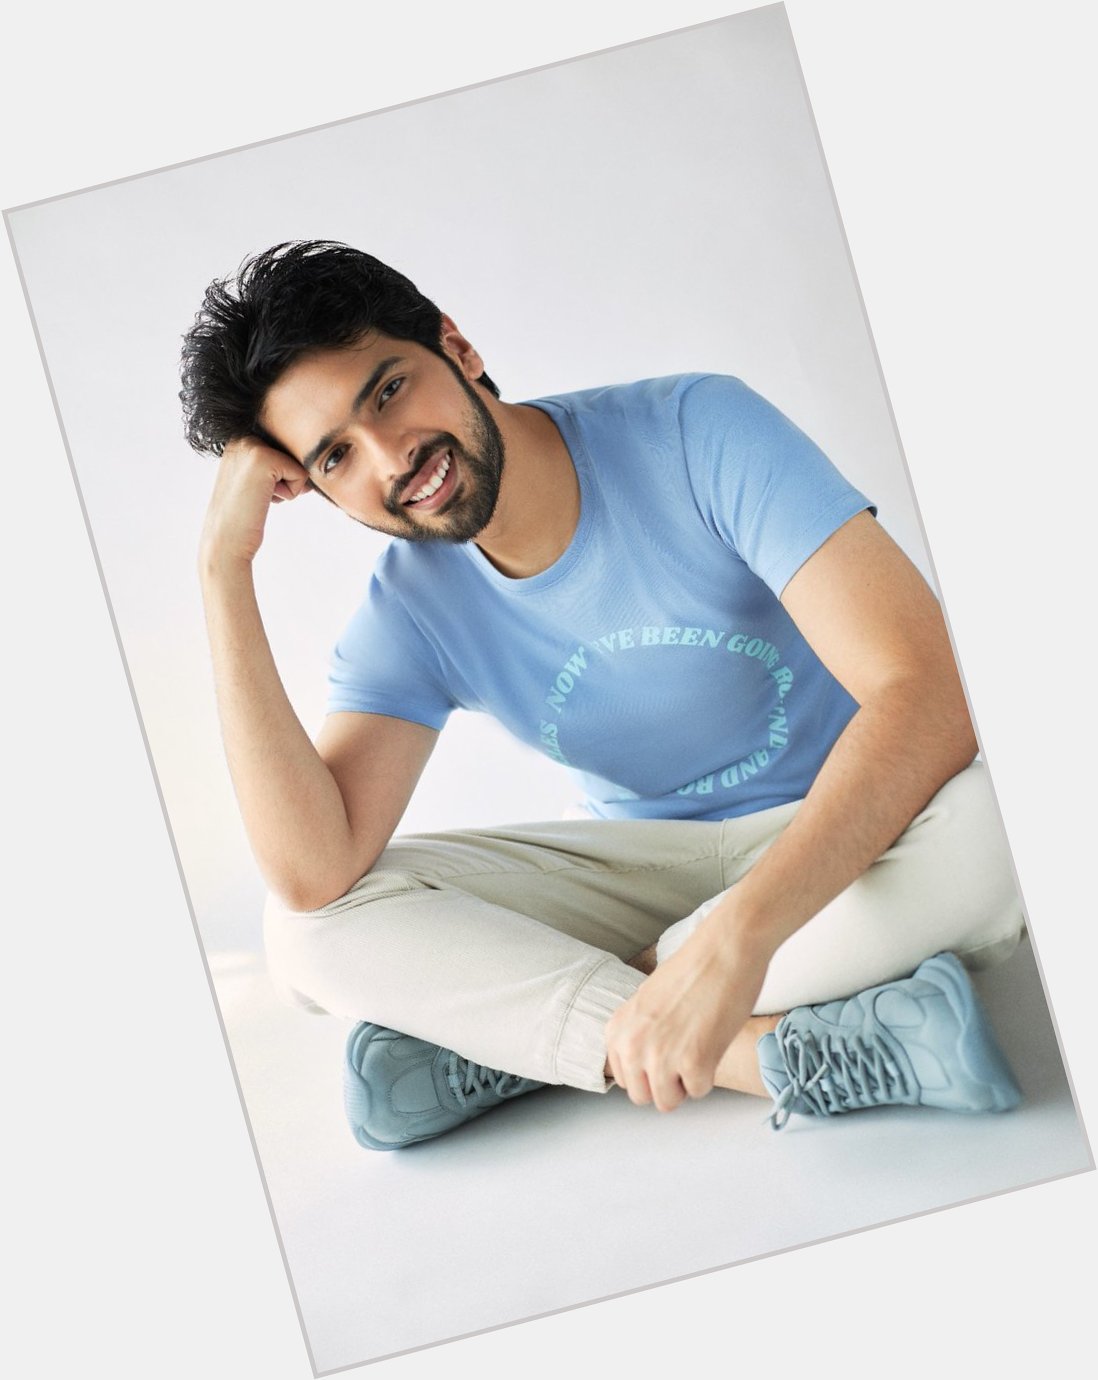 What a lovely smile     HAPPY BIRTHDAY ARMAAN MALIK 